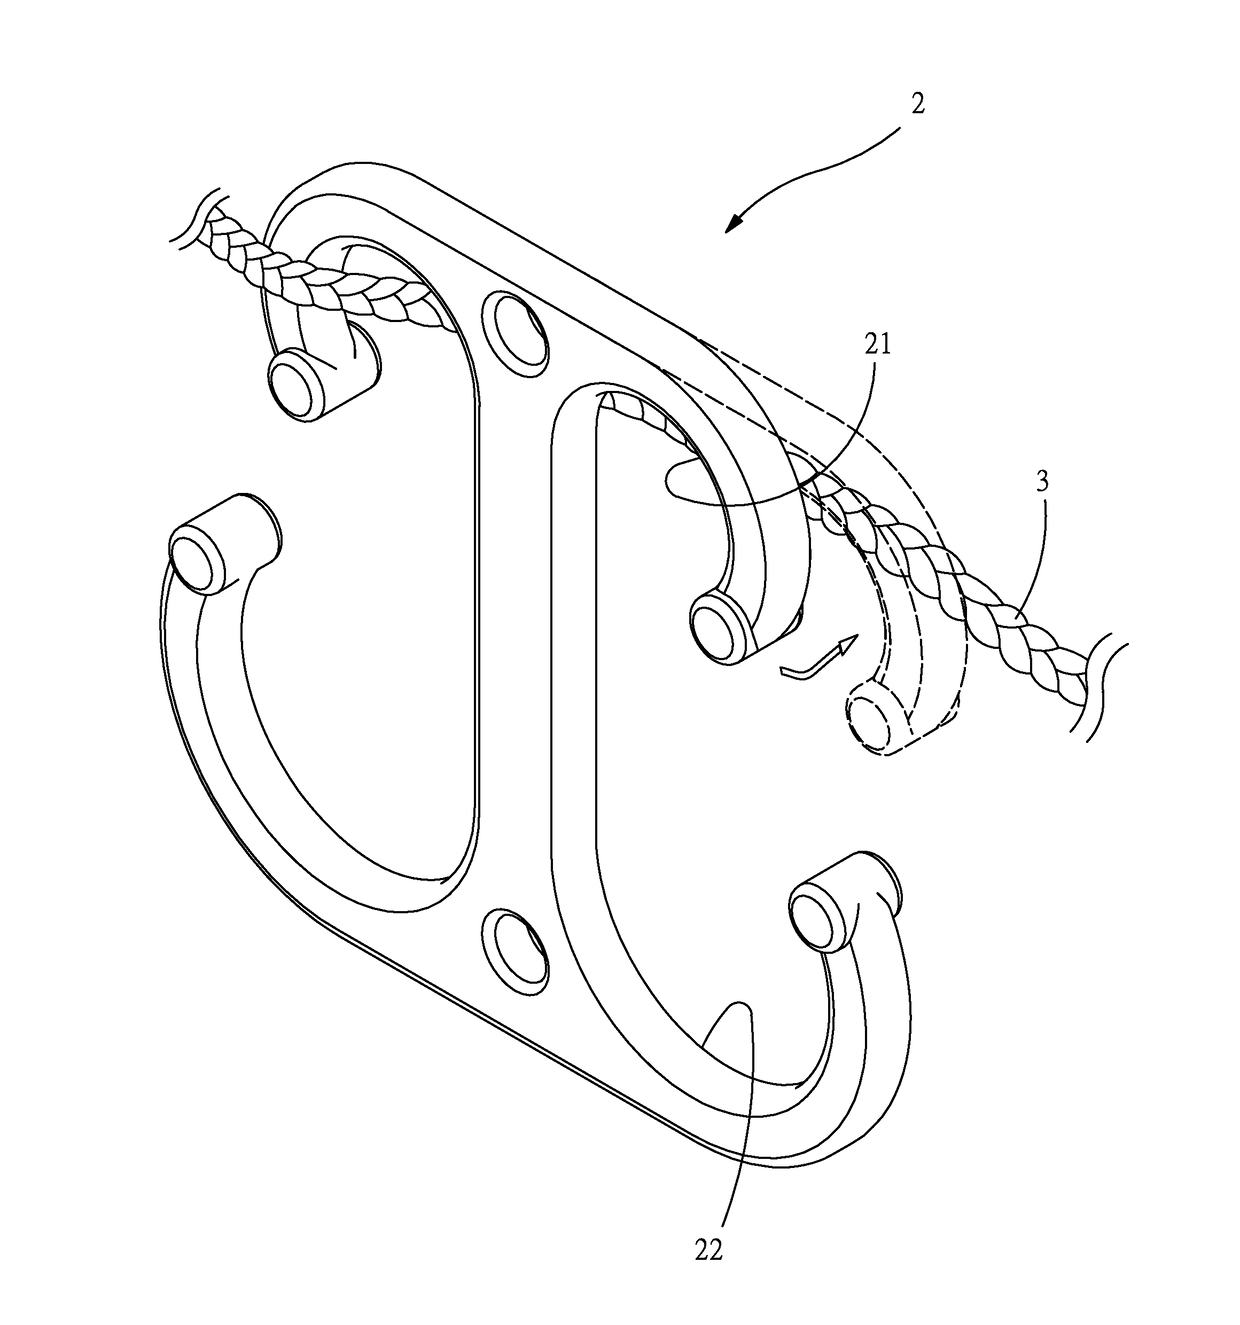 Dual Side-Hook Structure